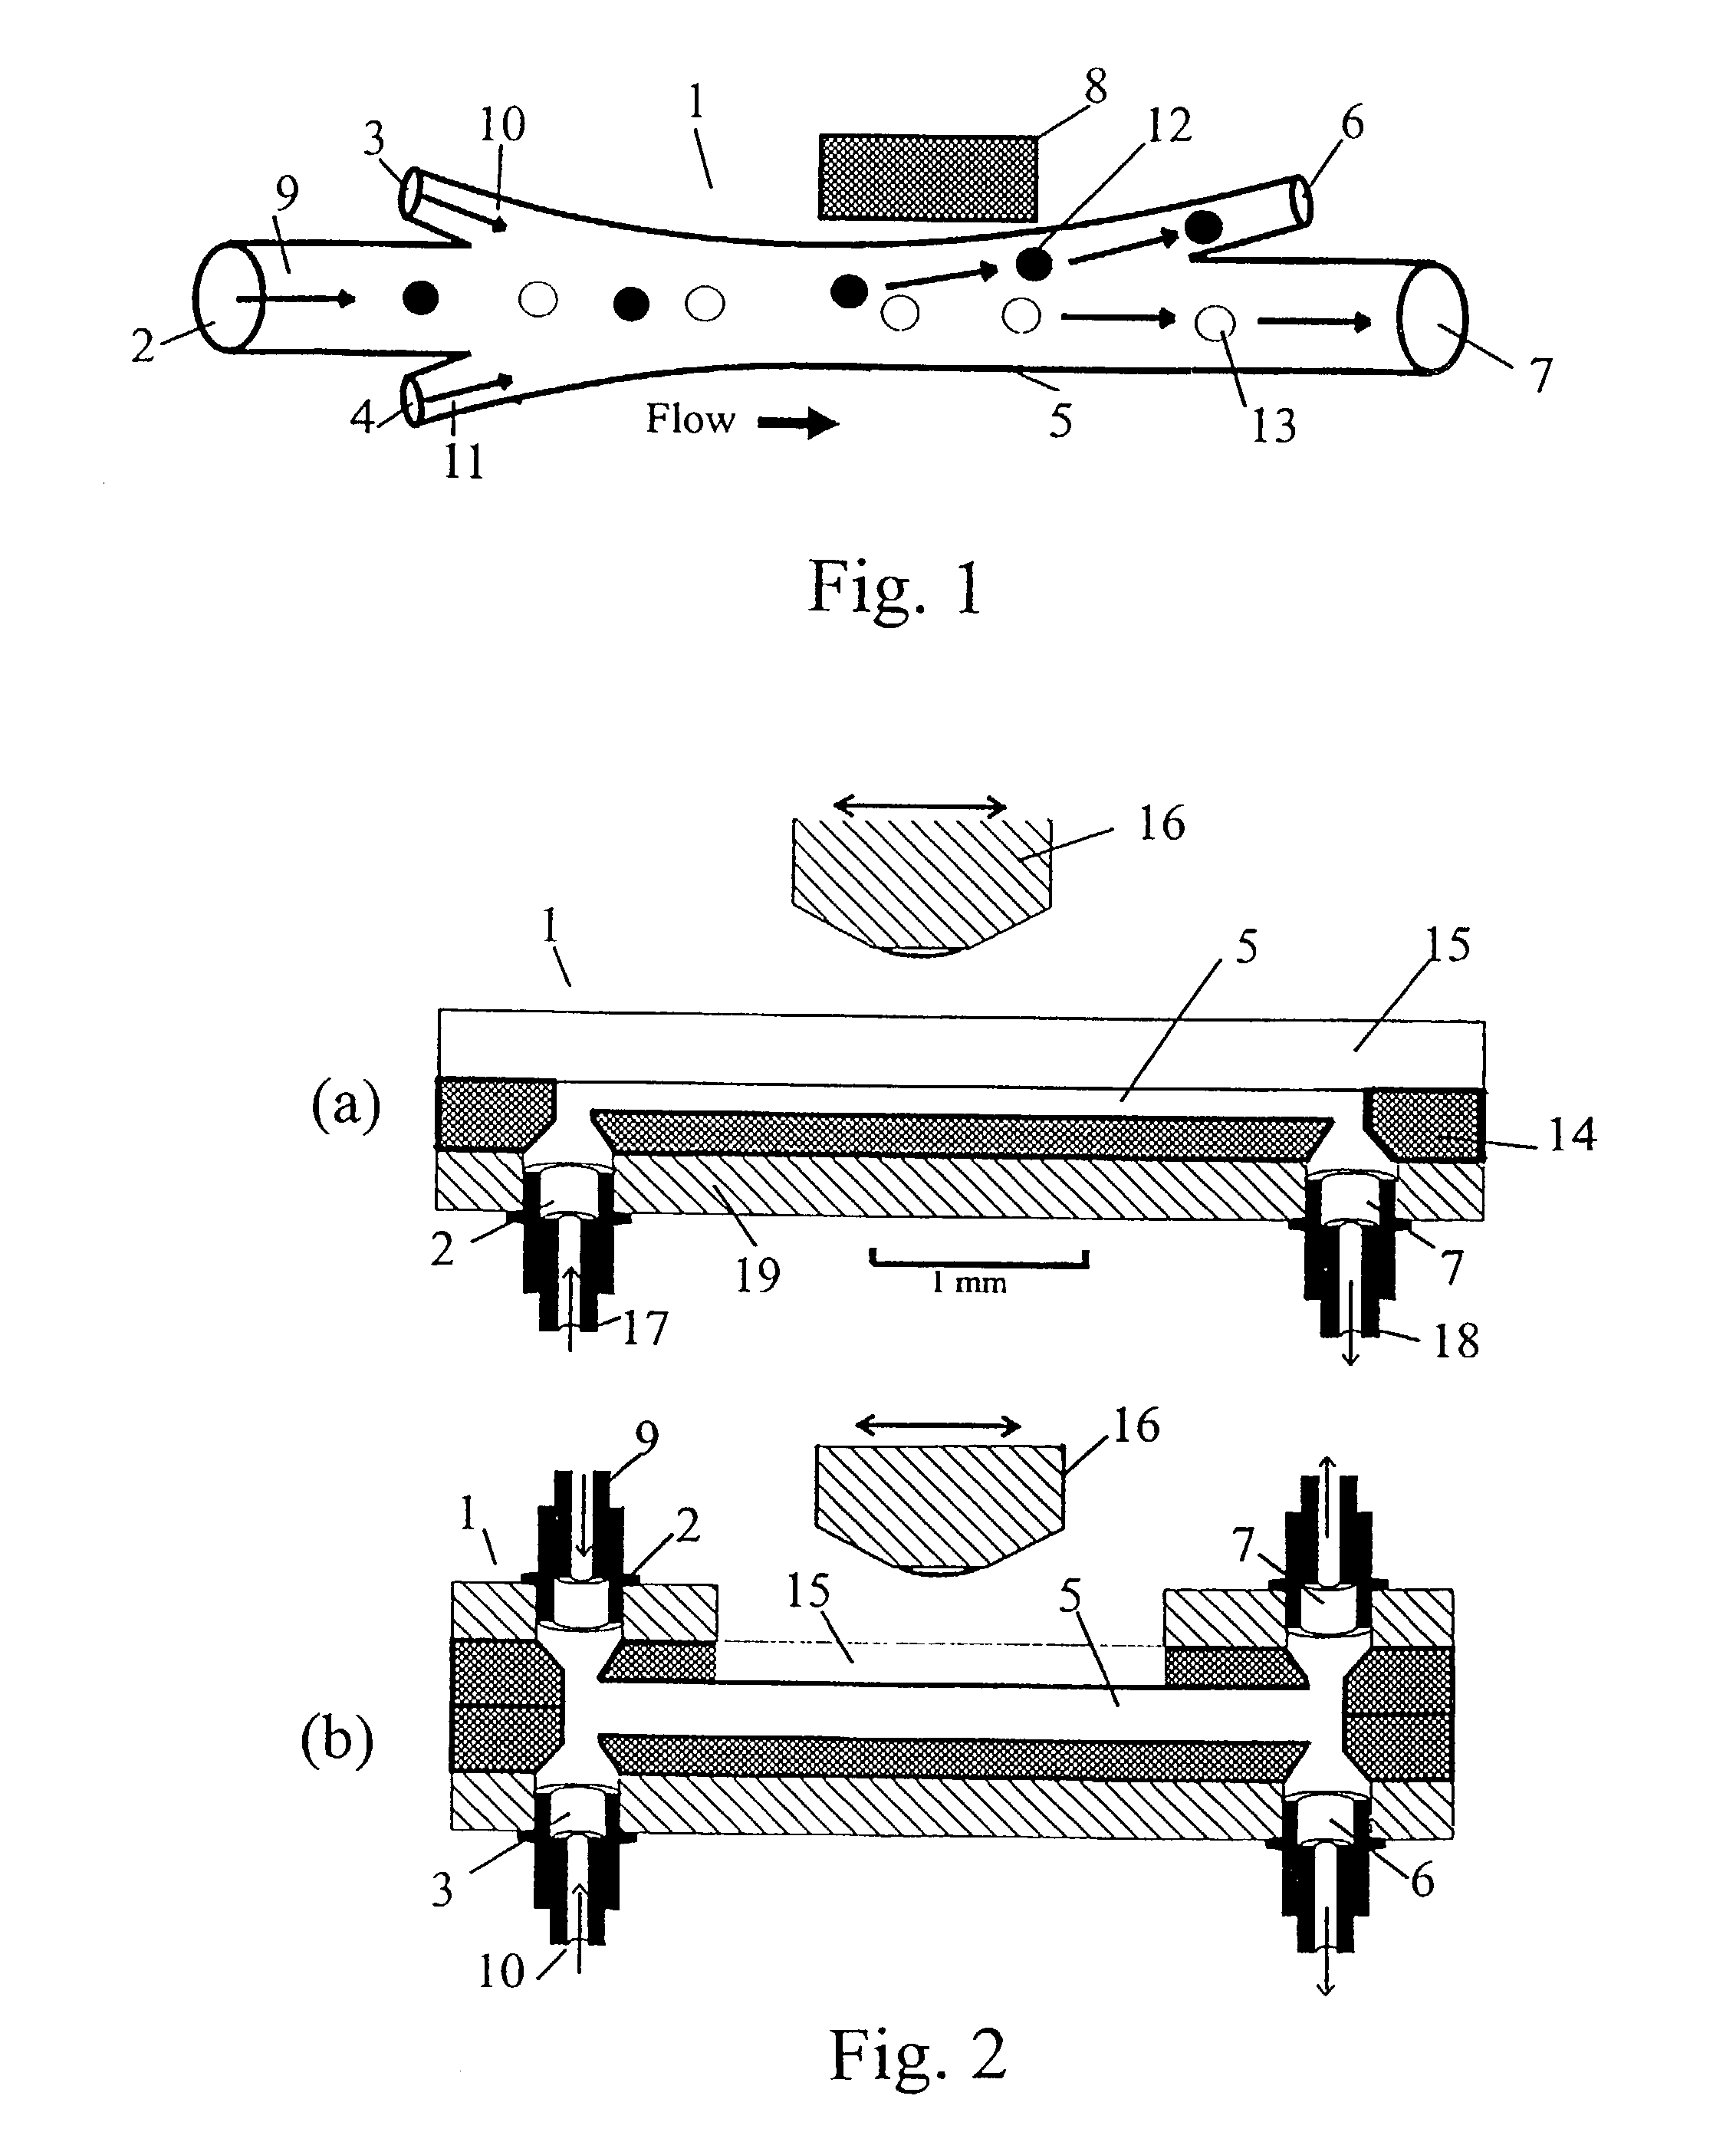 Microflow system for particle separation and analysis